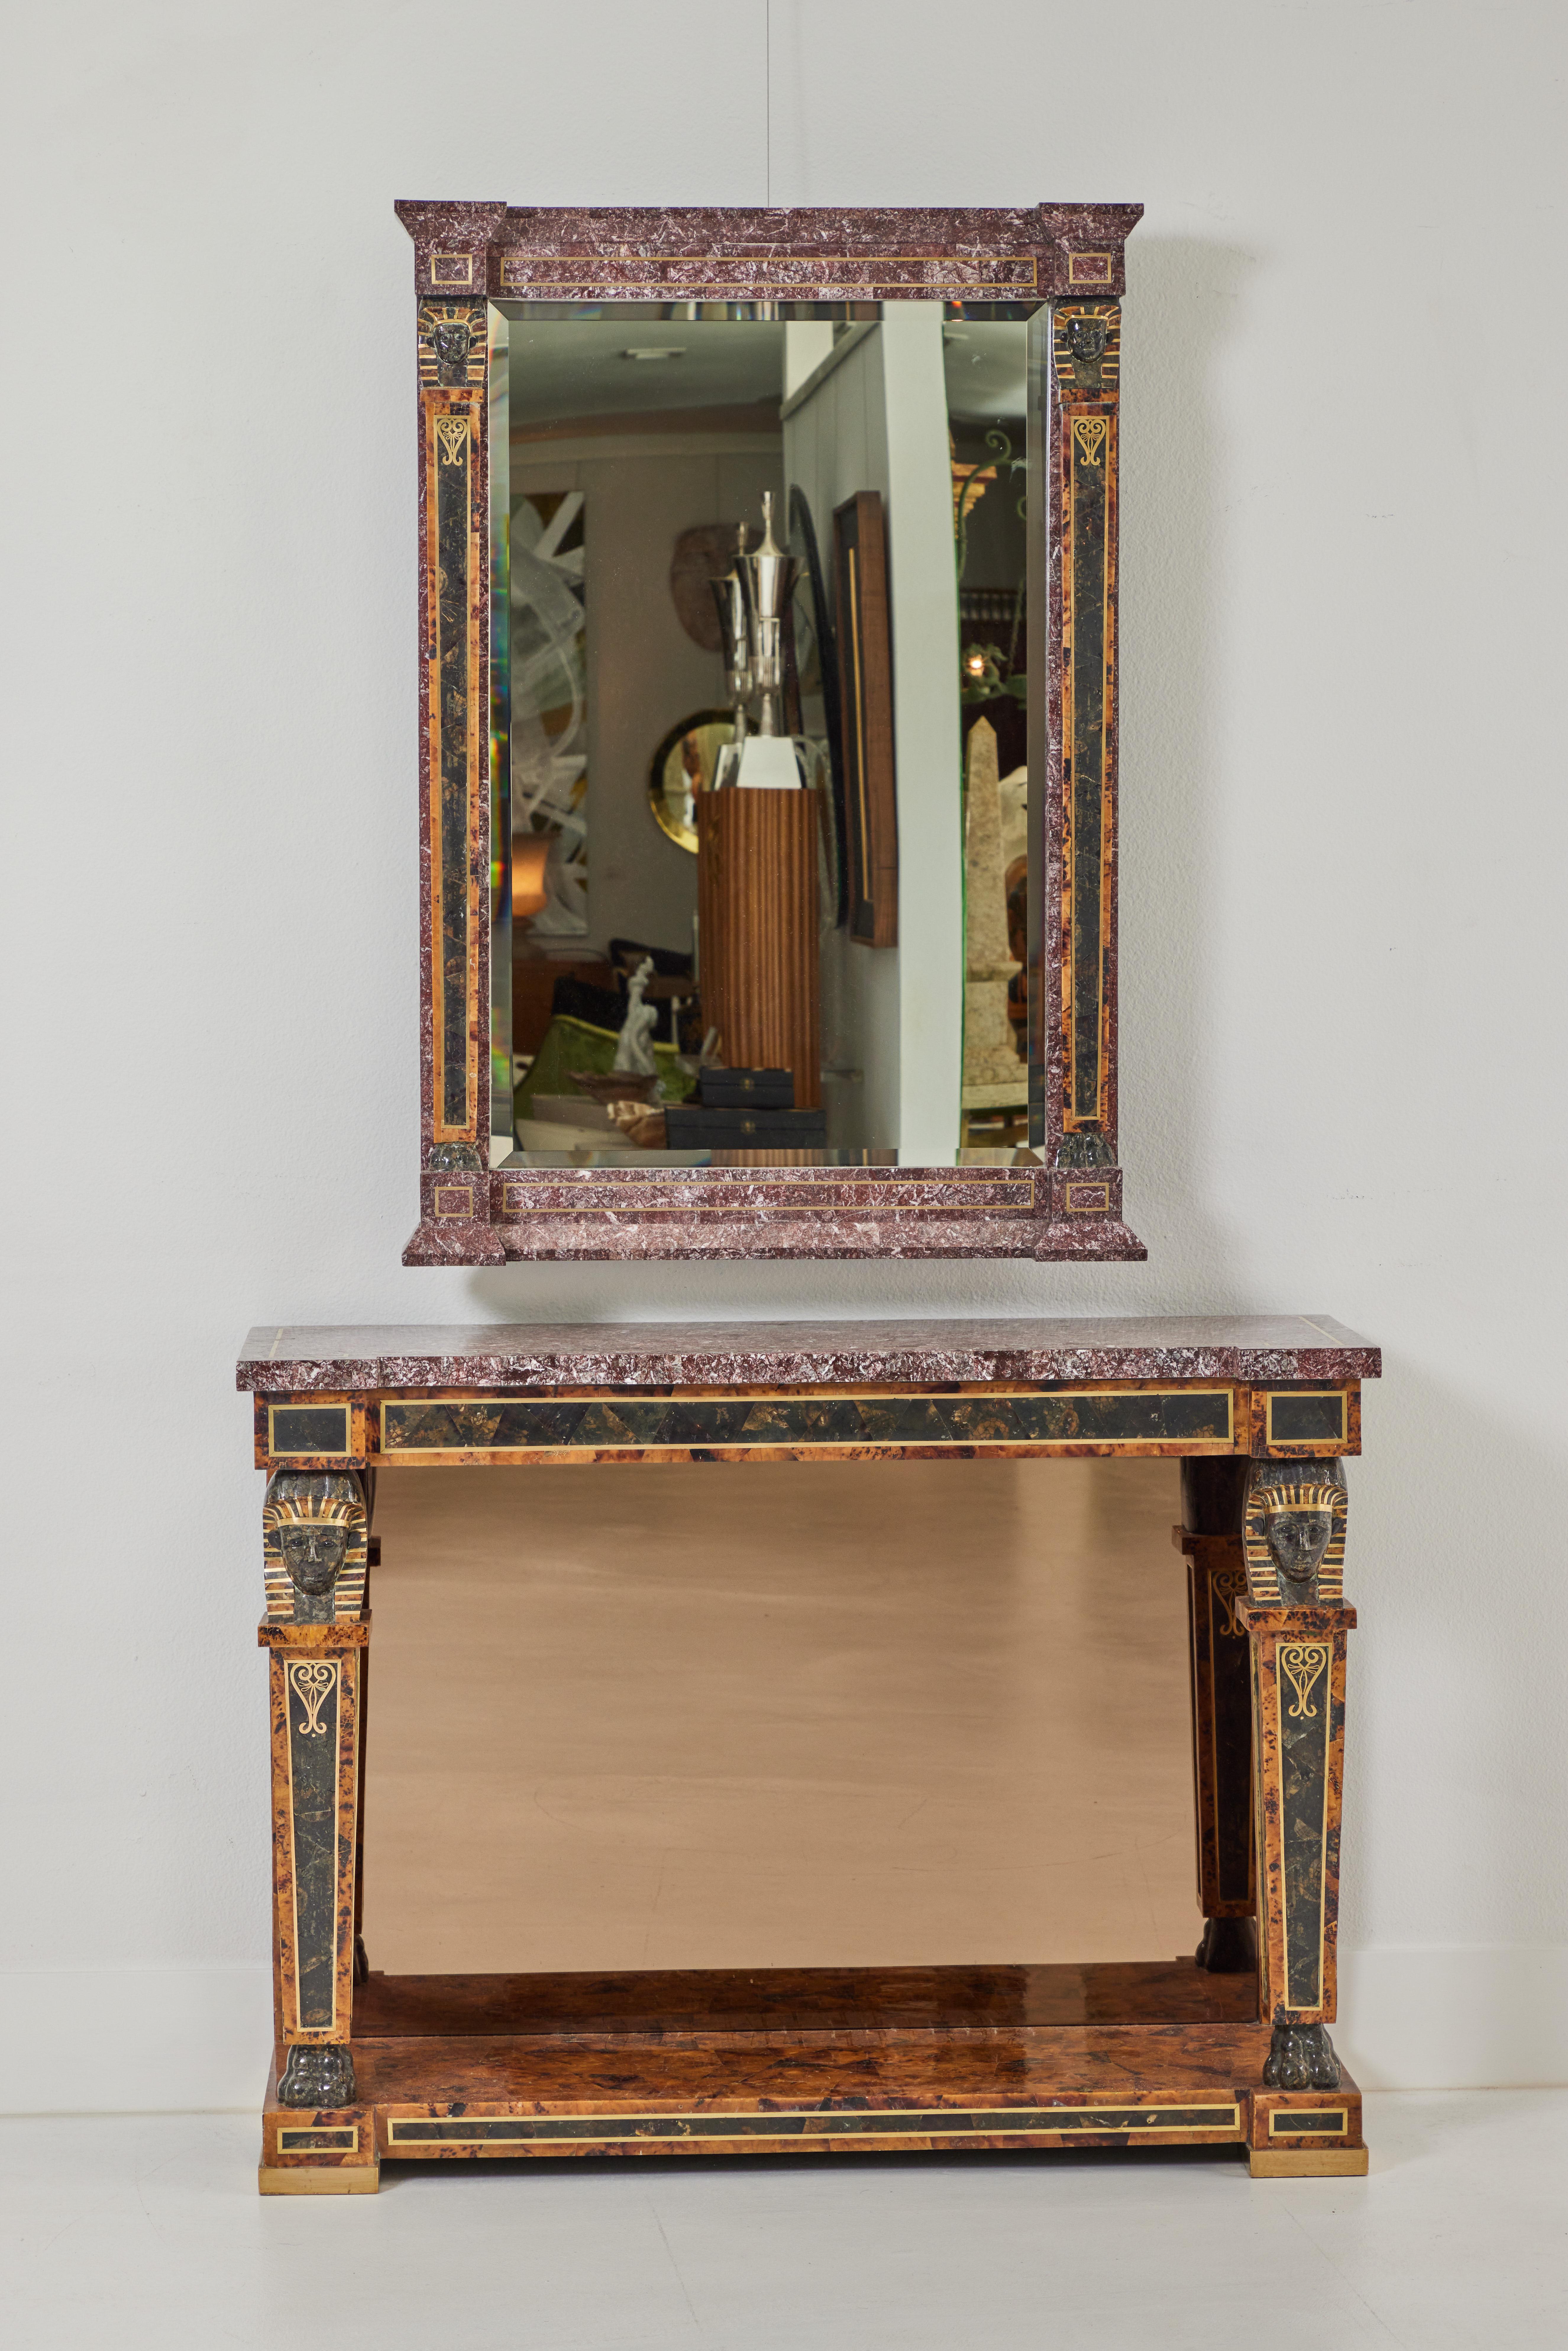 This Egyptian Revival style console and mirror features tesselated stone and shell with brass inlays. Made by Maitland Smith in the 1980s, the console enhanced with Sphinx heads above the front legs and brass inlays veneered in a combination of both